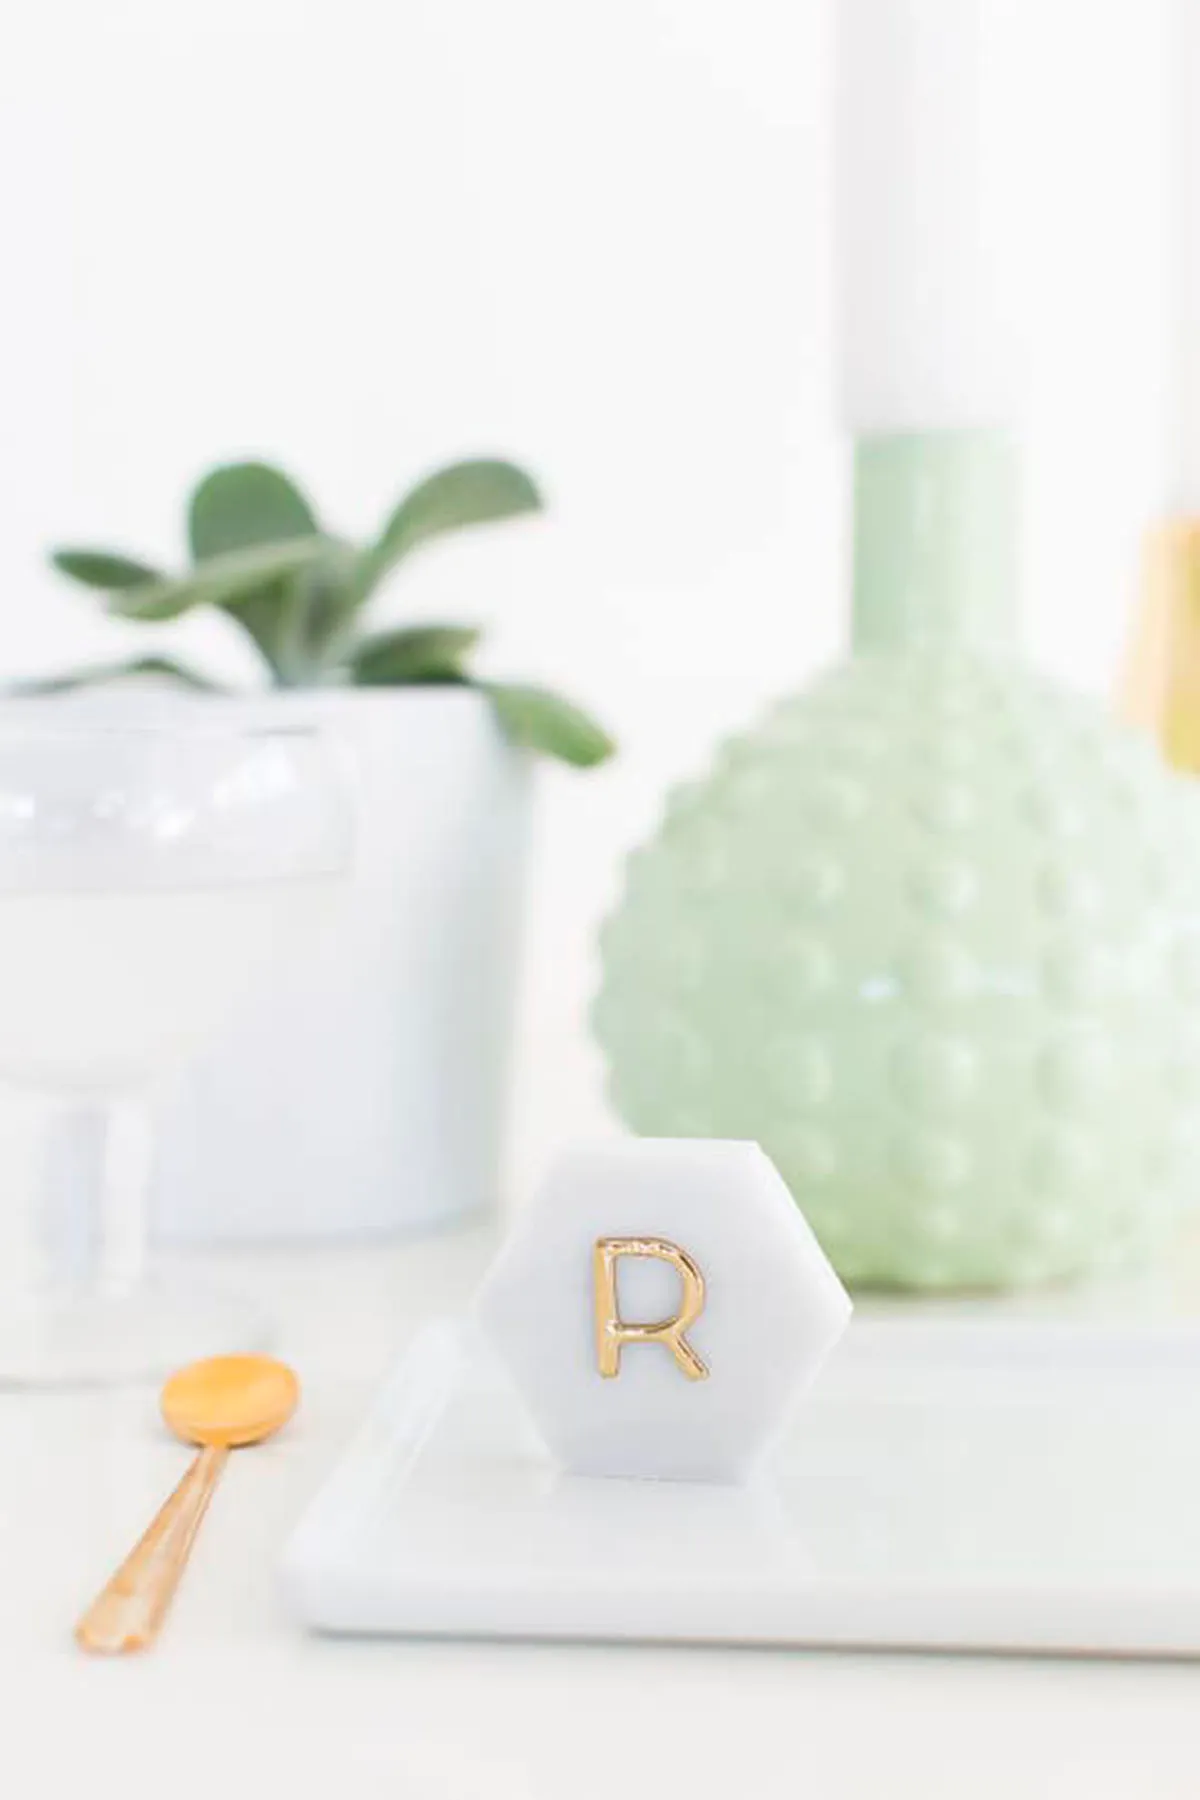 DIY marble place cards